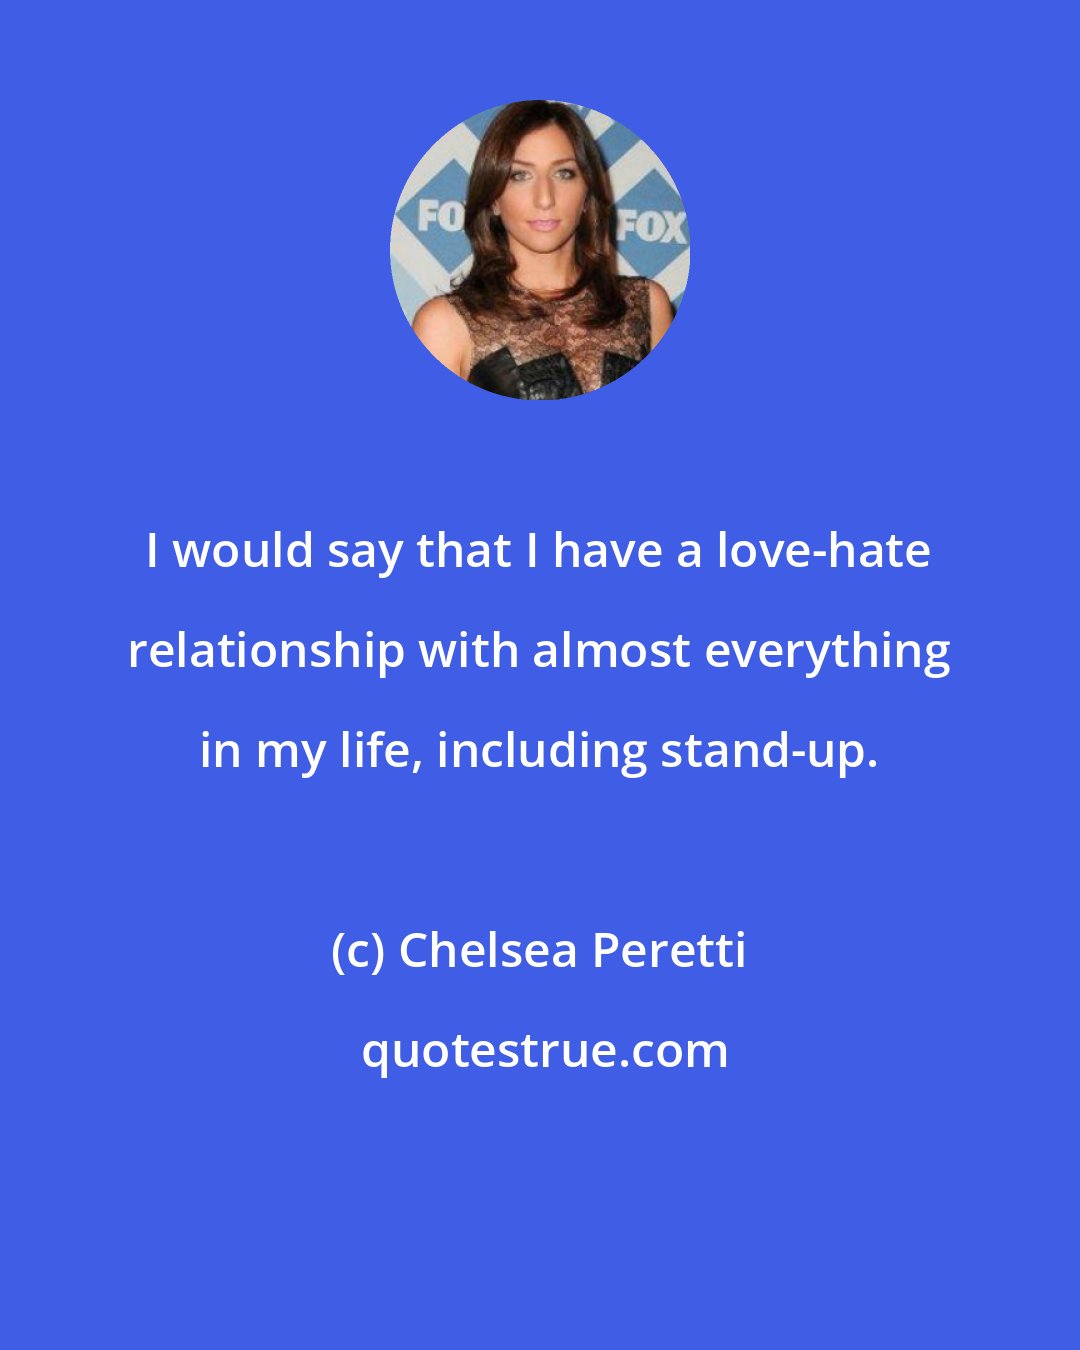 Chelsea Peretti: I would say that I have a love-hate relationship with almost everything in my life, including stand-up.